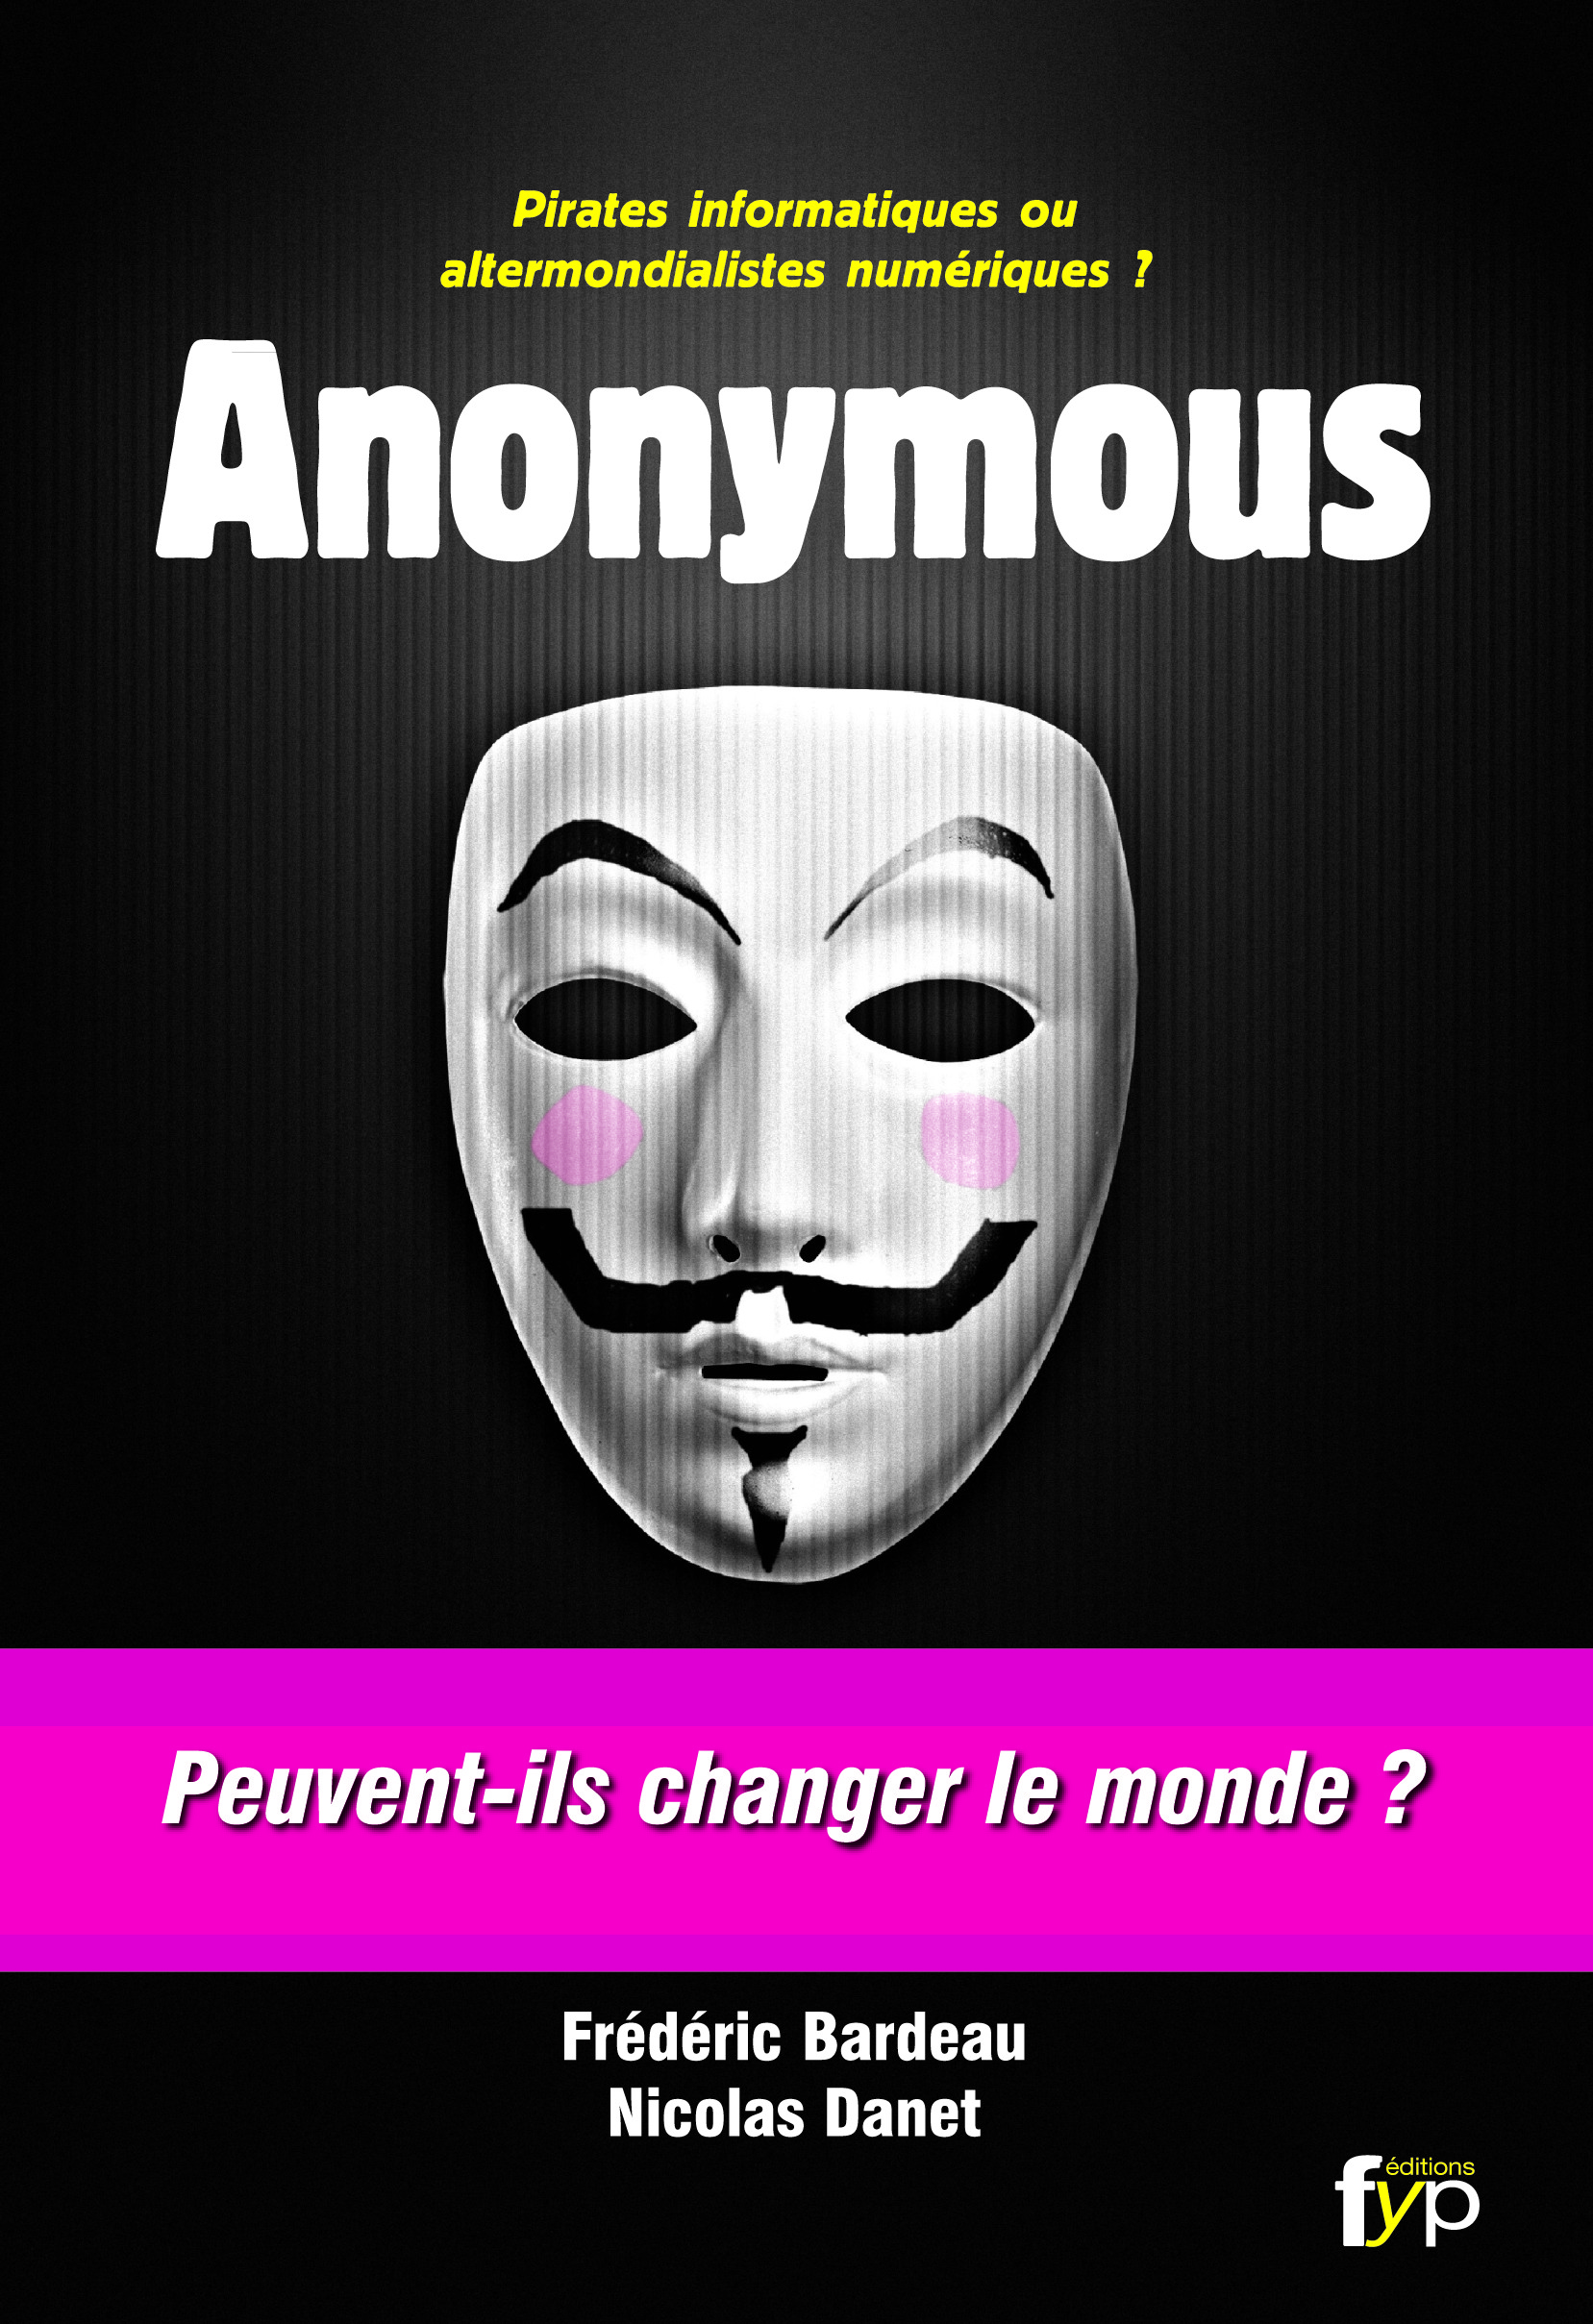 http://www.fypeditions.com/wp-content/uploads/2011/11/Couv-Anonymous.jpg